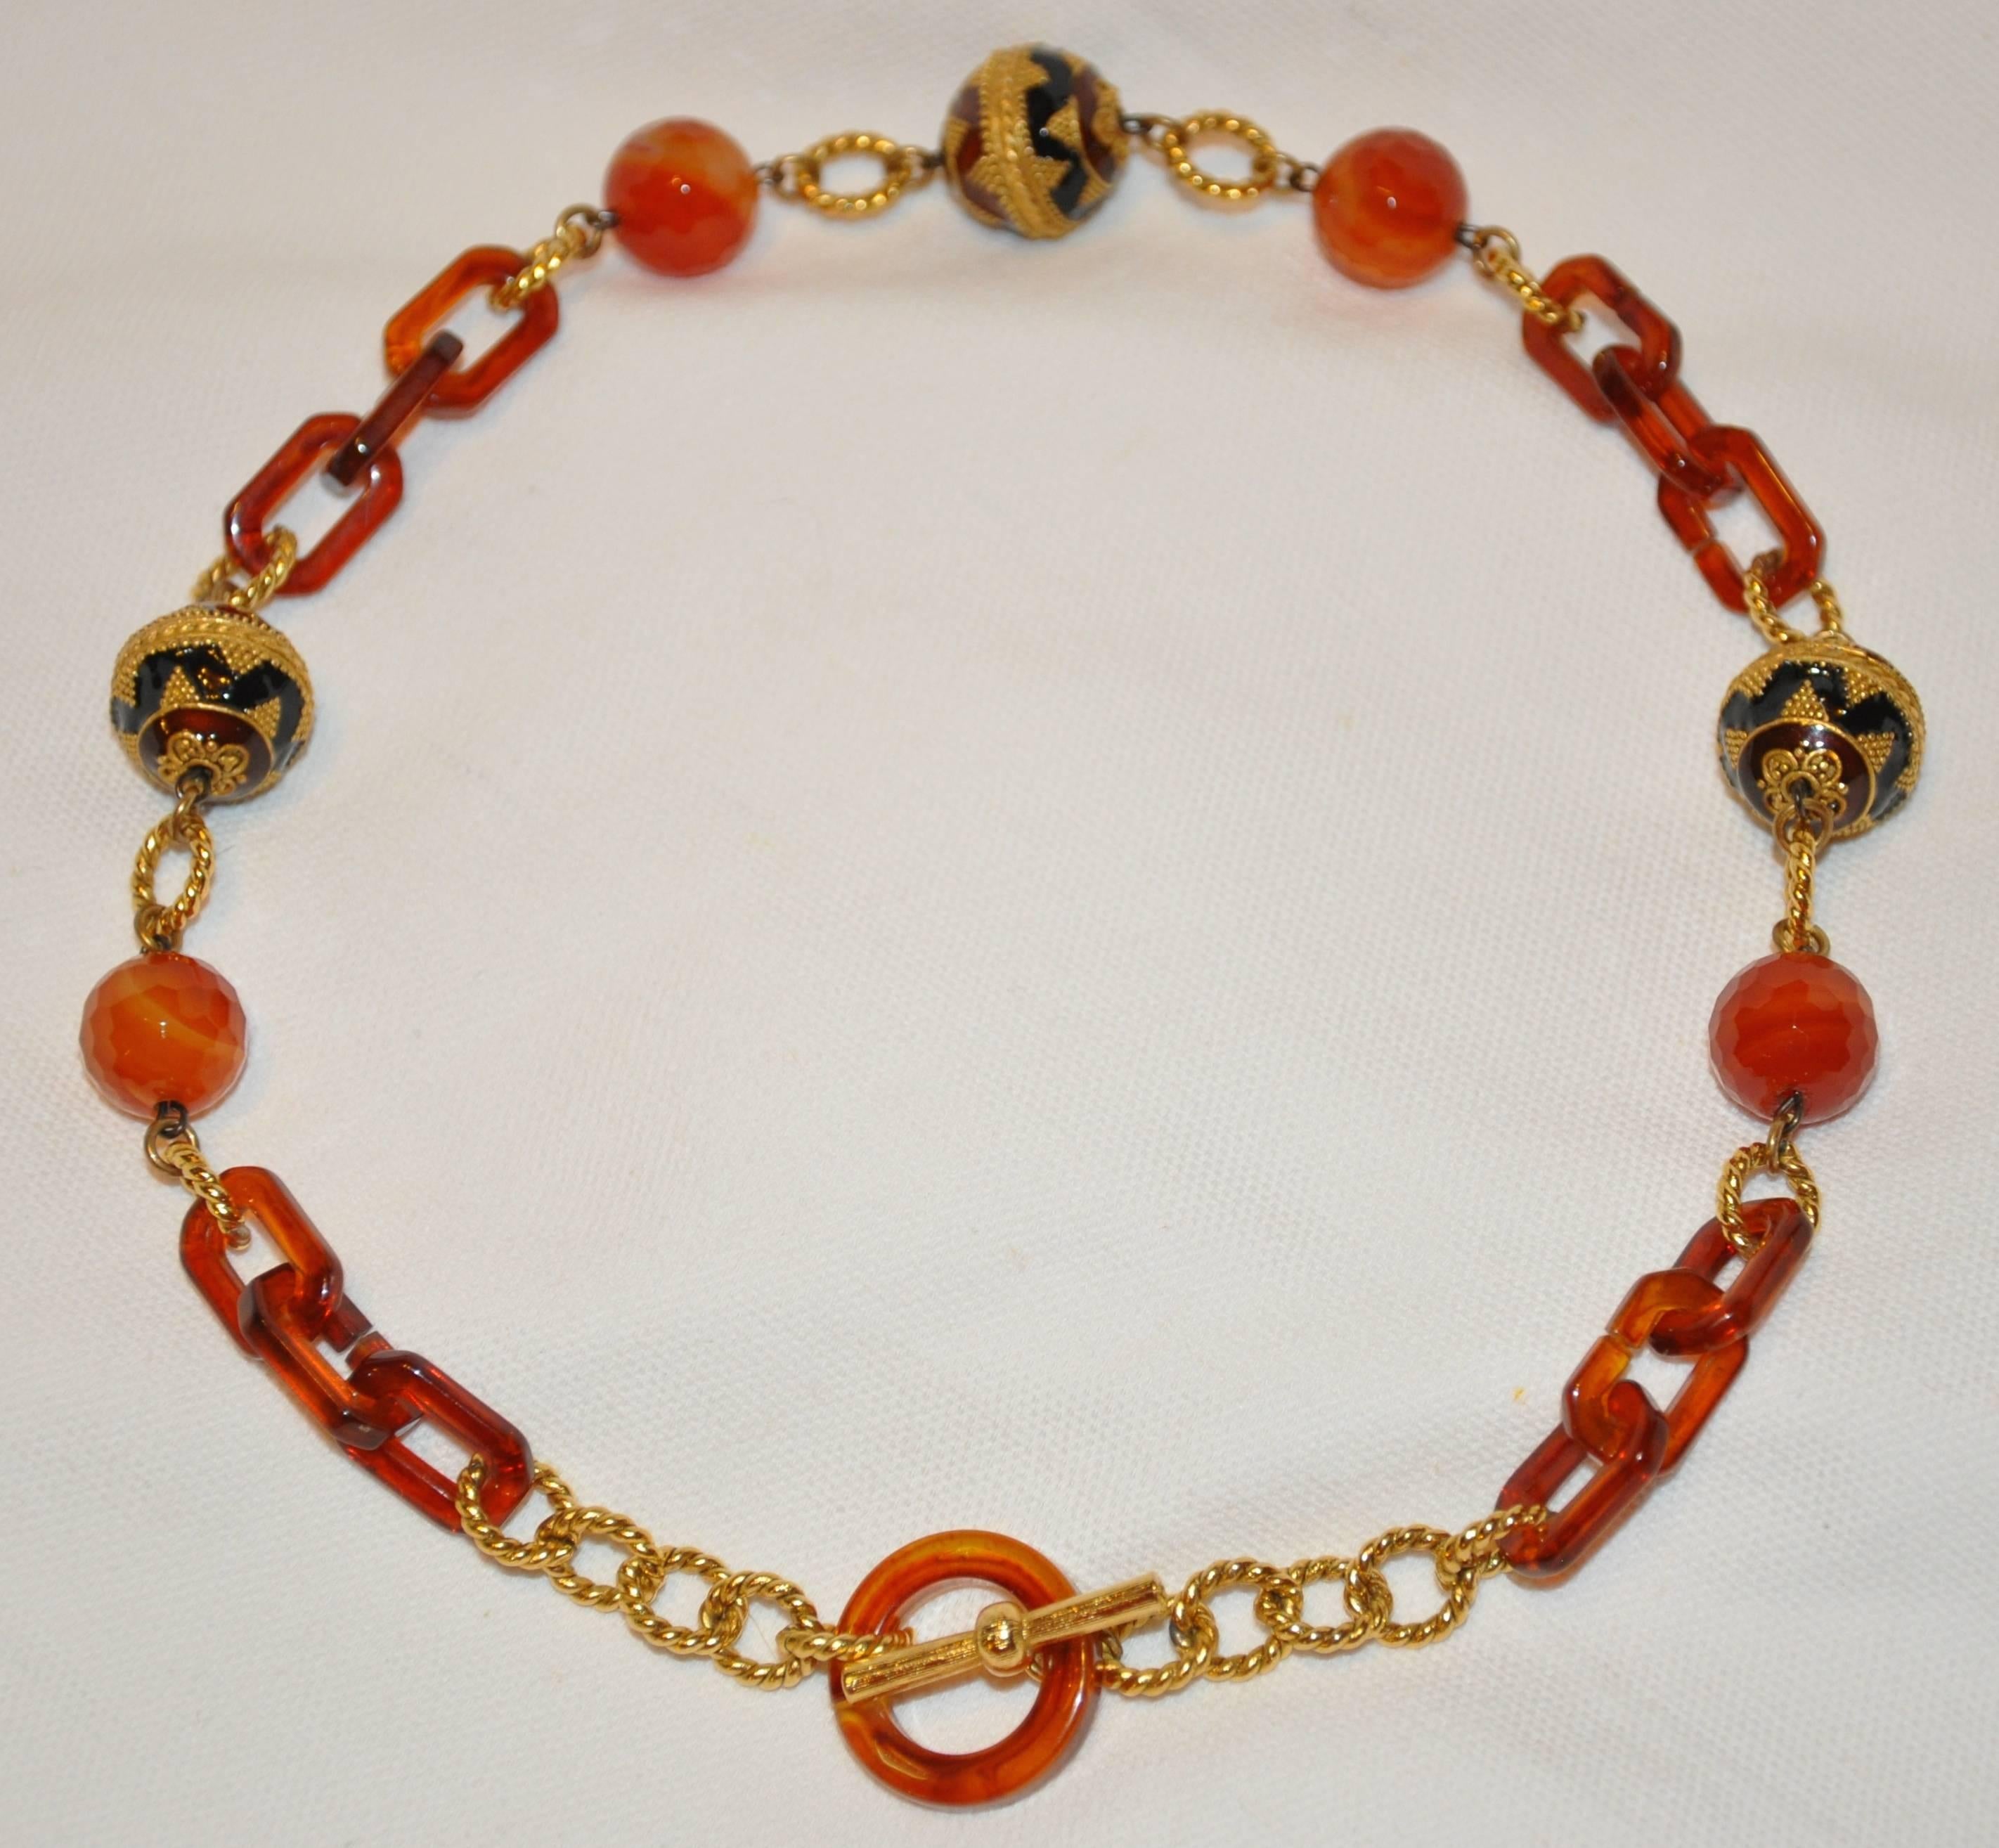        This wonderfully elegant multi textured enamel with glass and lucite necklace is perfectly combined with such detailing as polished gilded gold hardware accented with etching as well as enamel beads, amber-tone lucite and glass beads, and